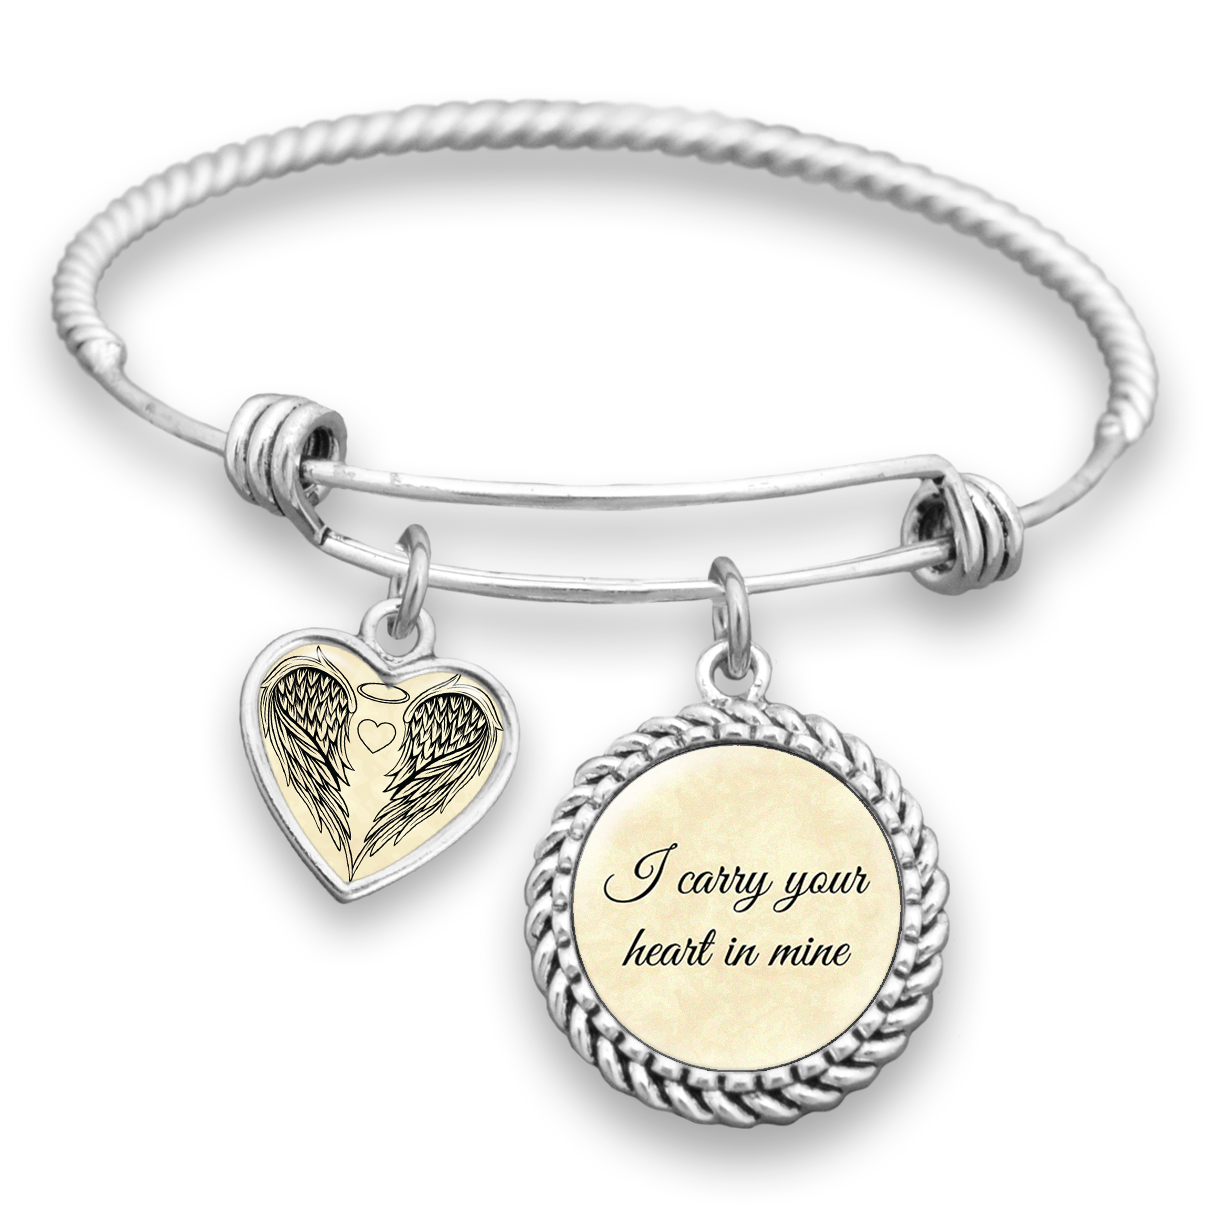 I Carry Your Heart In Mine Charm Bracelet